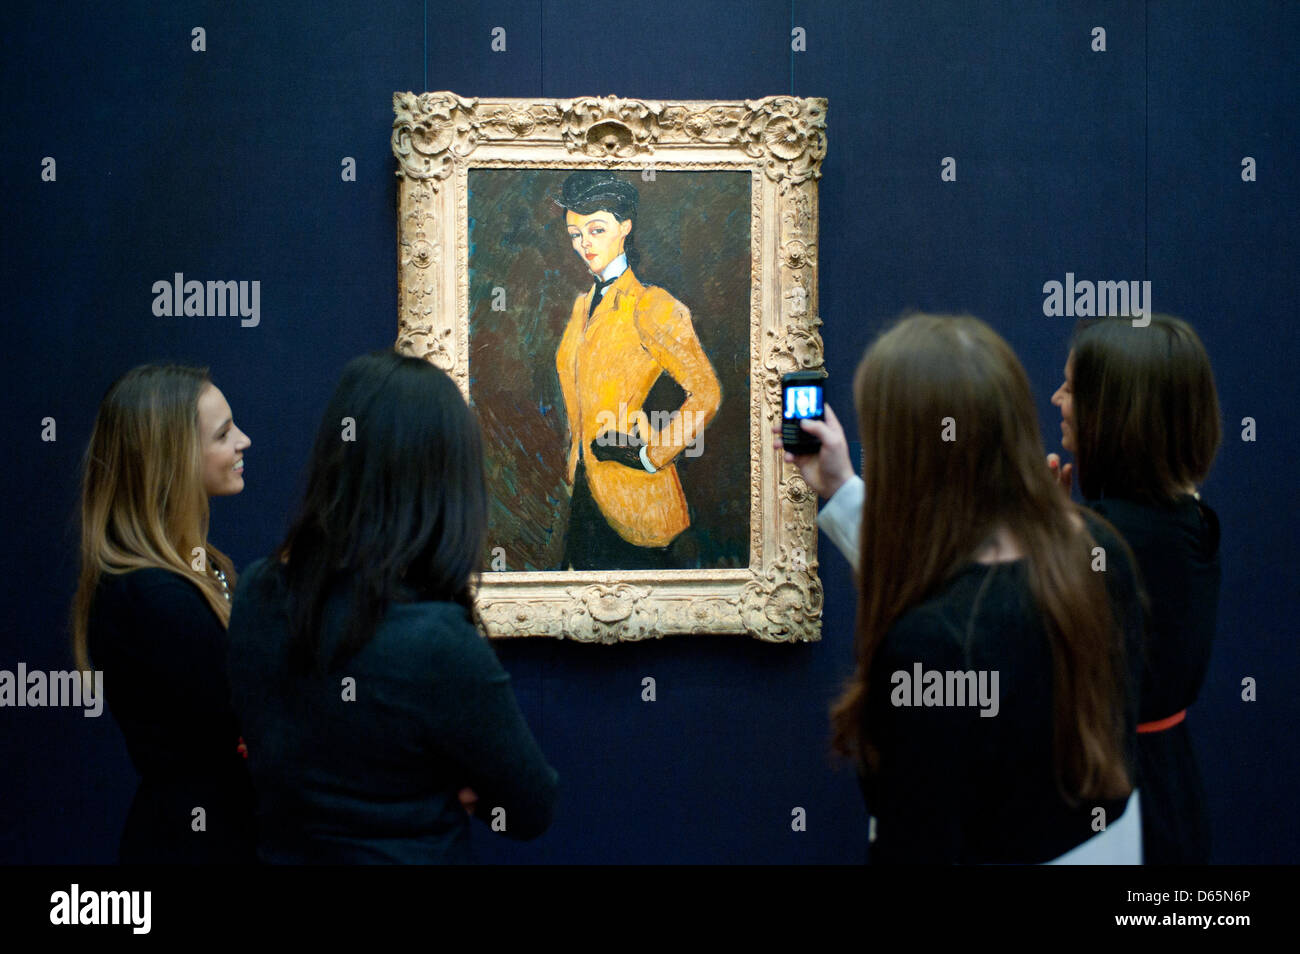 London, UK. 12th April 2013. Sotheby's employees pose in front of Amedeo Modigliani  'L'Amazone' (Est. $20-30 million). The work will go on sale at Sotheby’s New York in May 2013. The Blockbuster sales at include works by Richter, Modigliani, Picasso, Rodin, Bacon, Cezanne. Credit: Piero Cruciatti / Alamy Live News Stock Photo